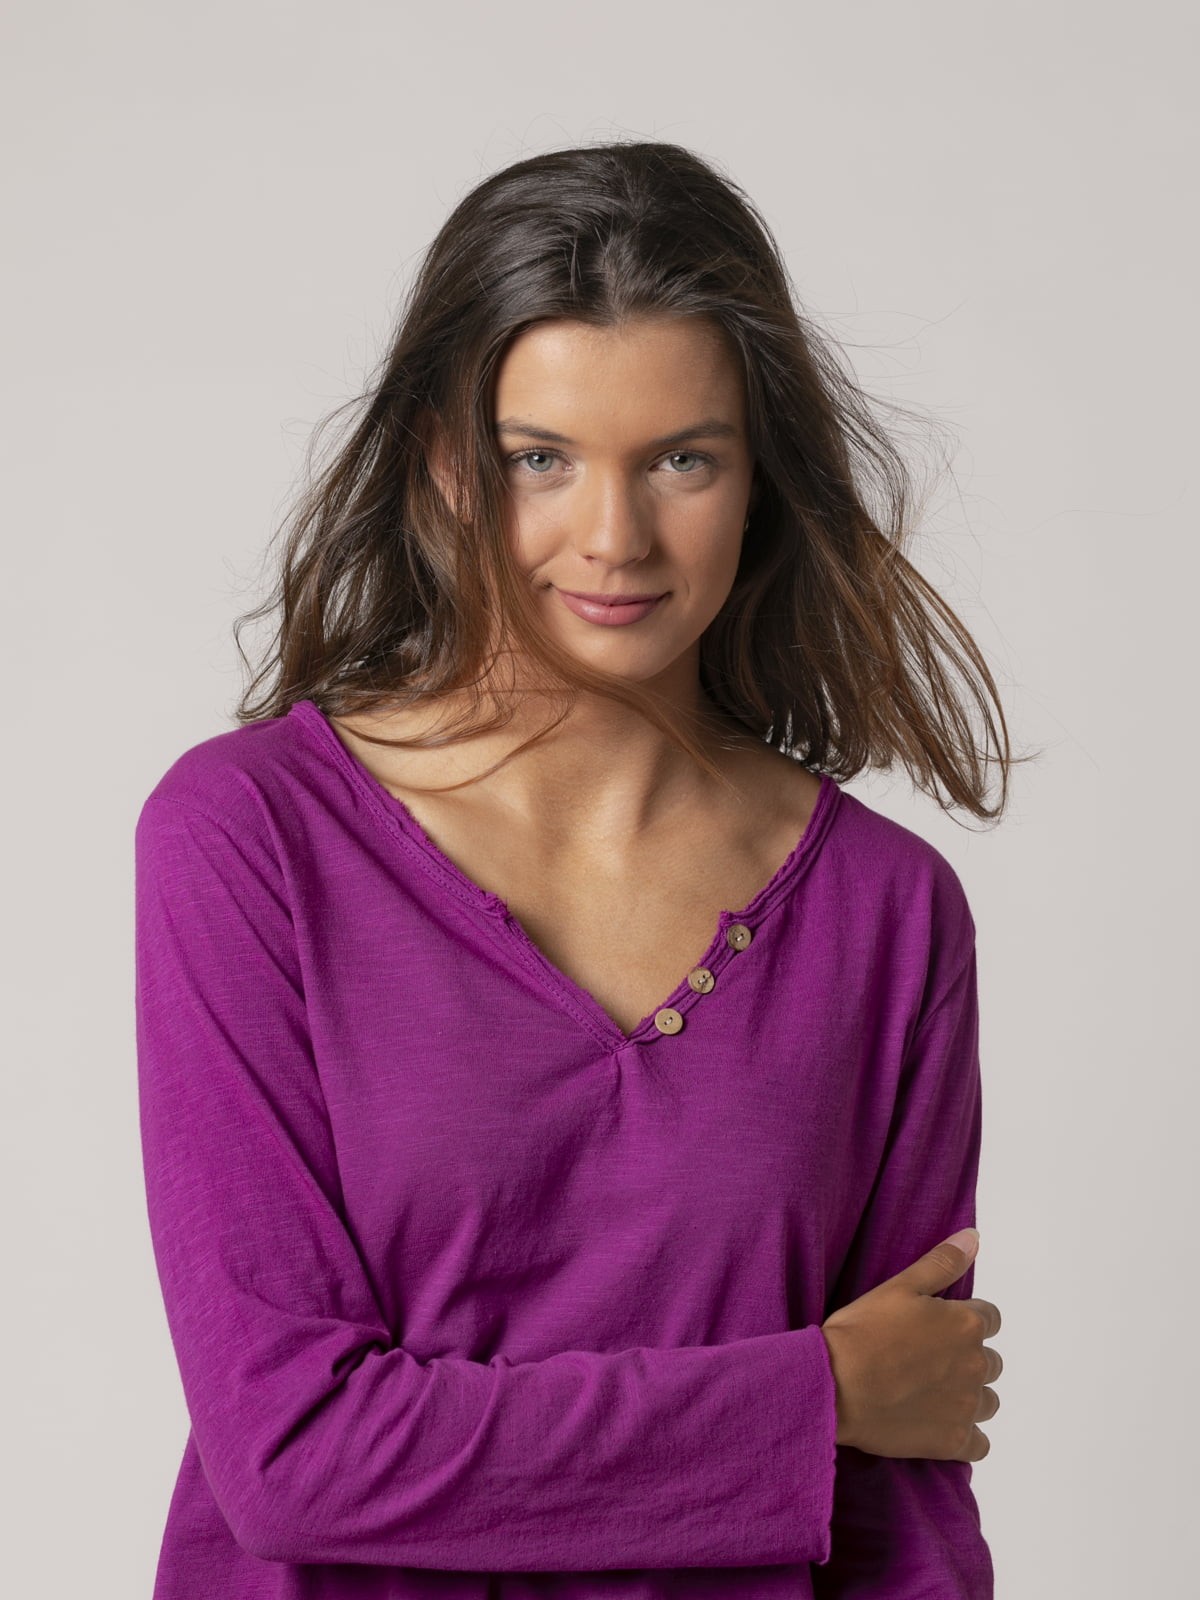 Woman cotton t-shirt with neckline and button detail Mallow